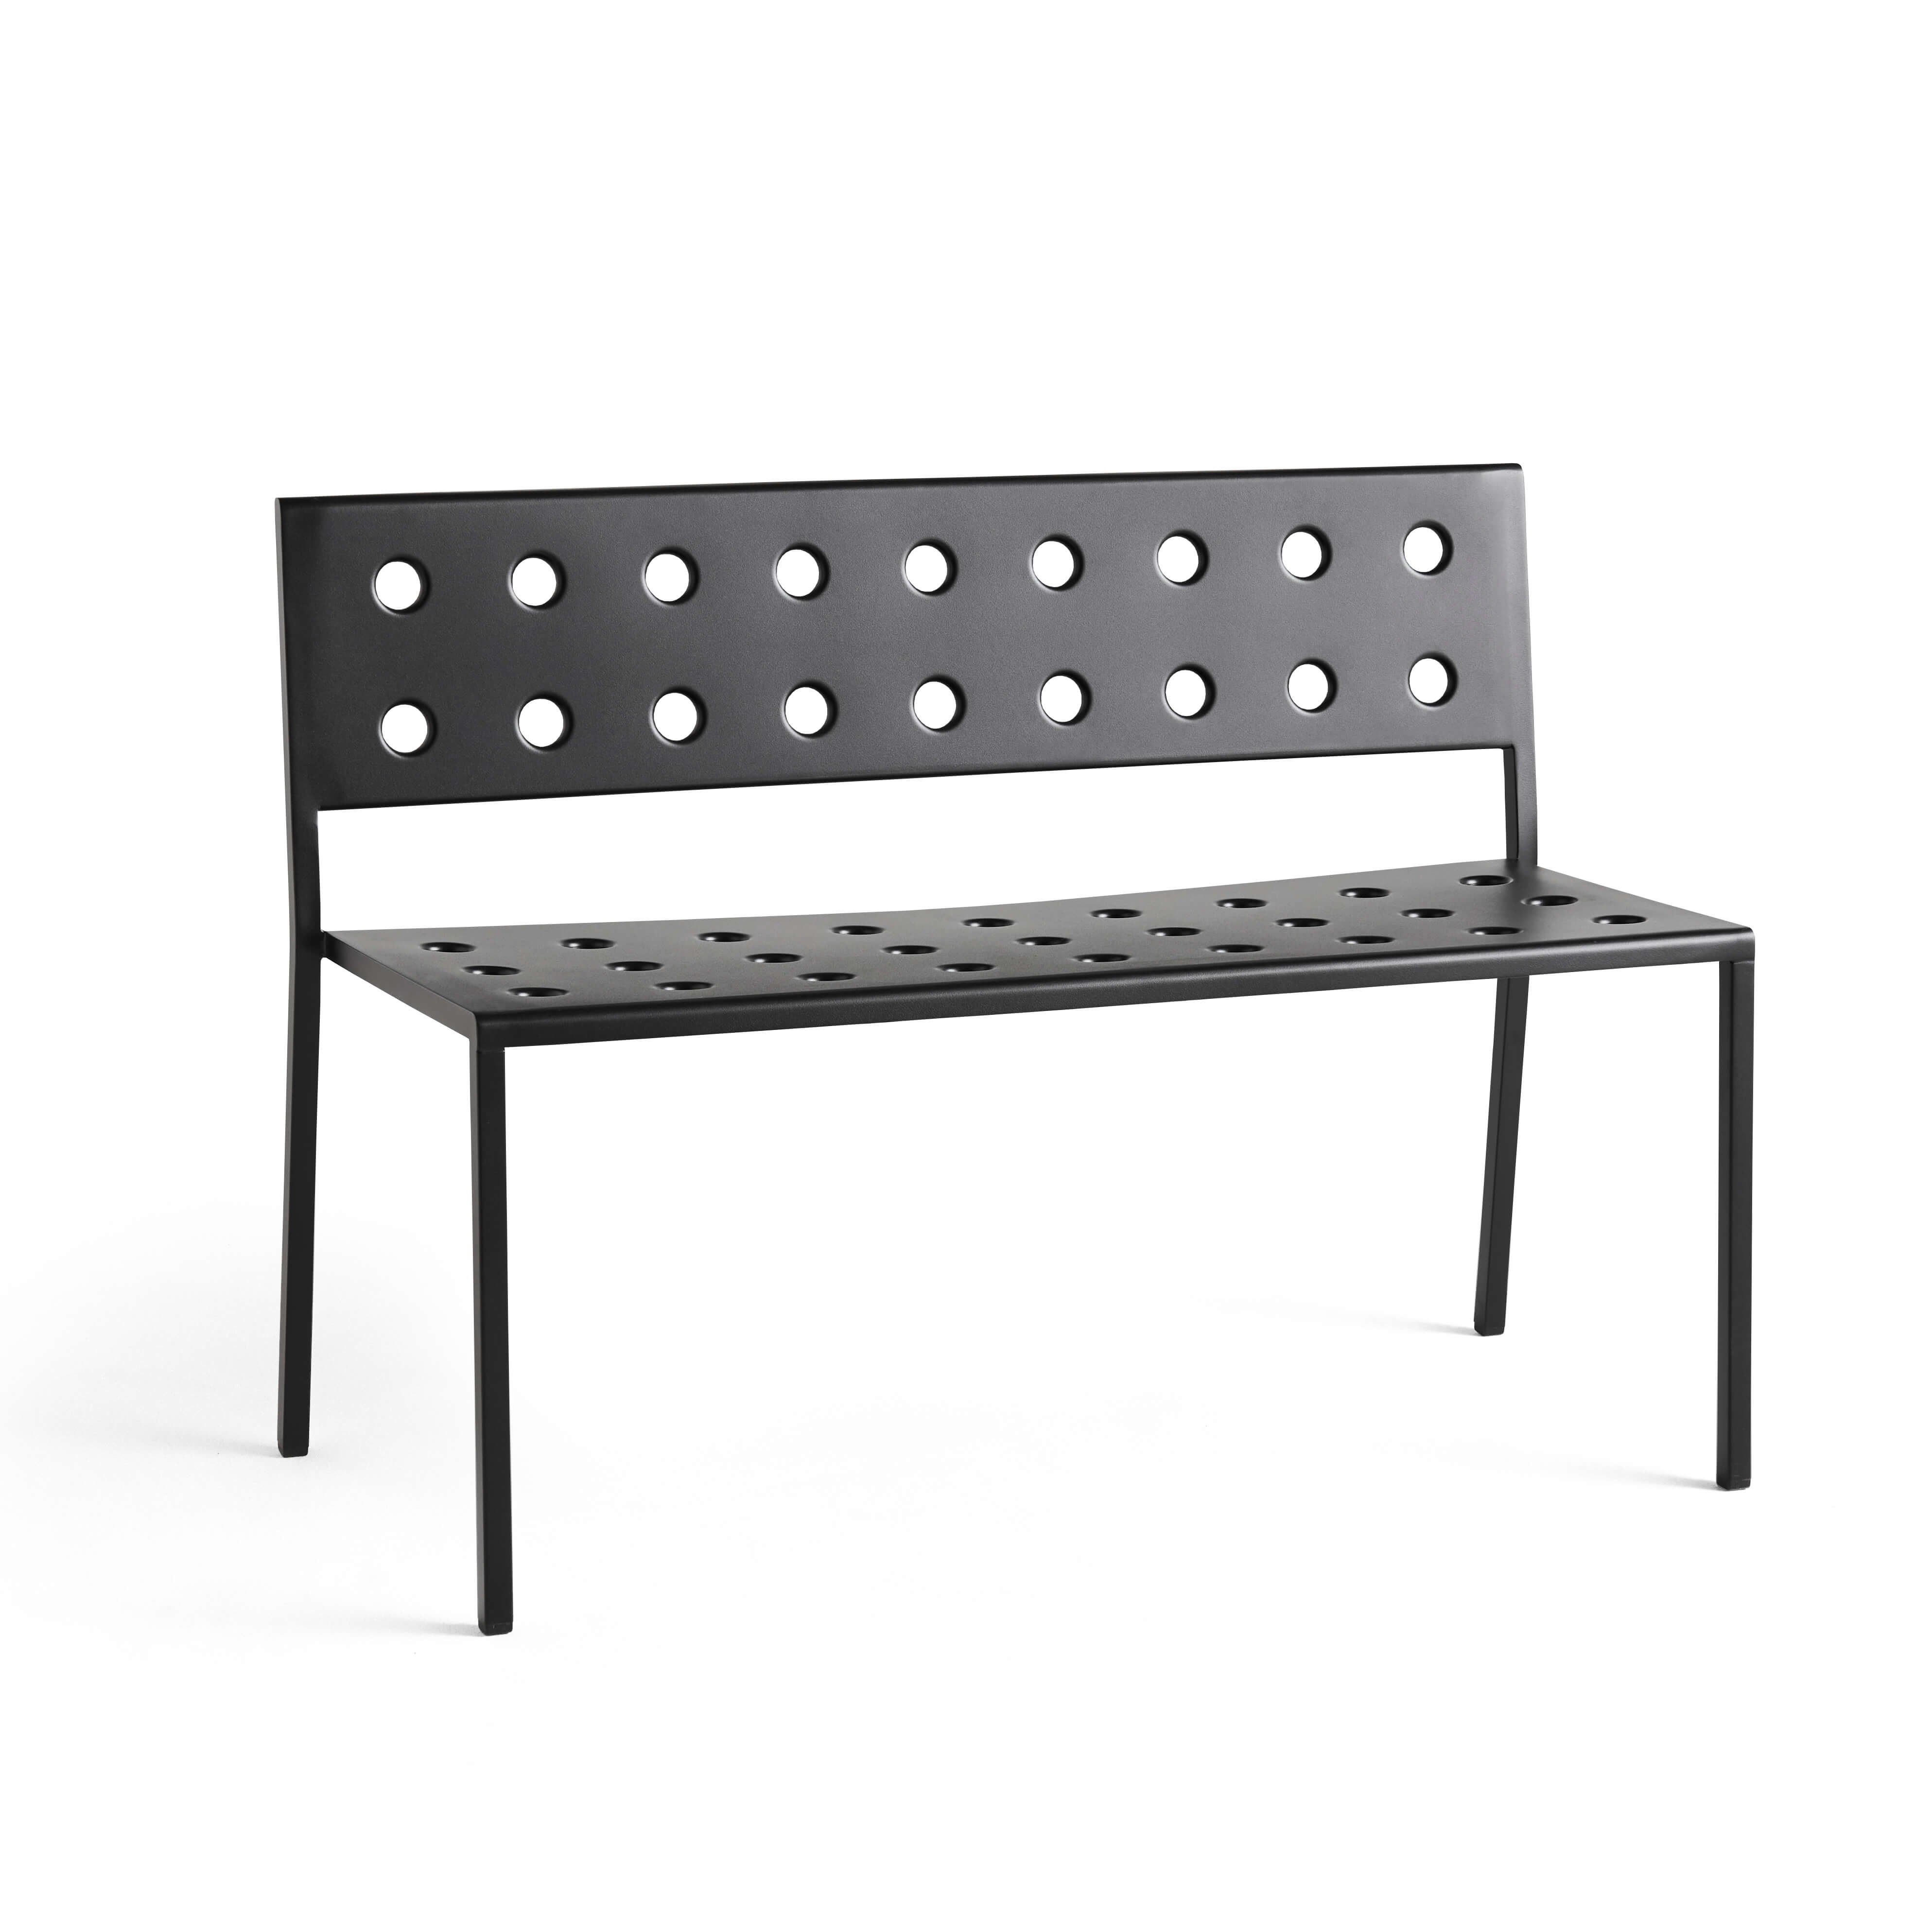 Balcony dining bench - Anthracite